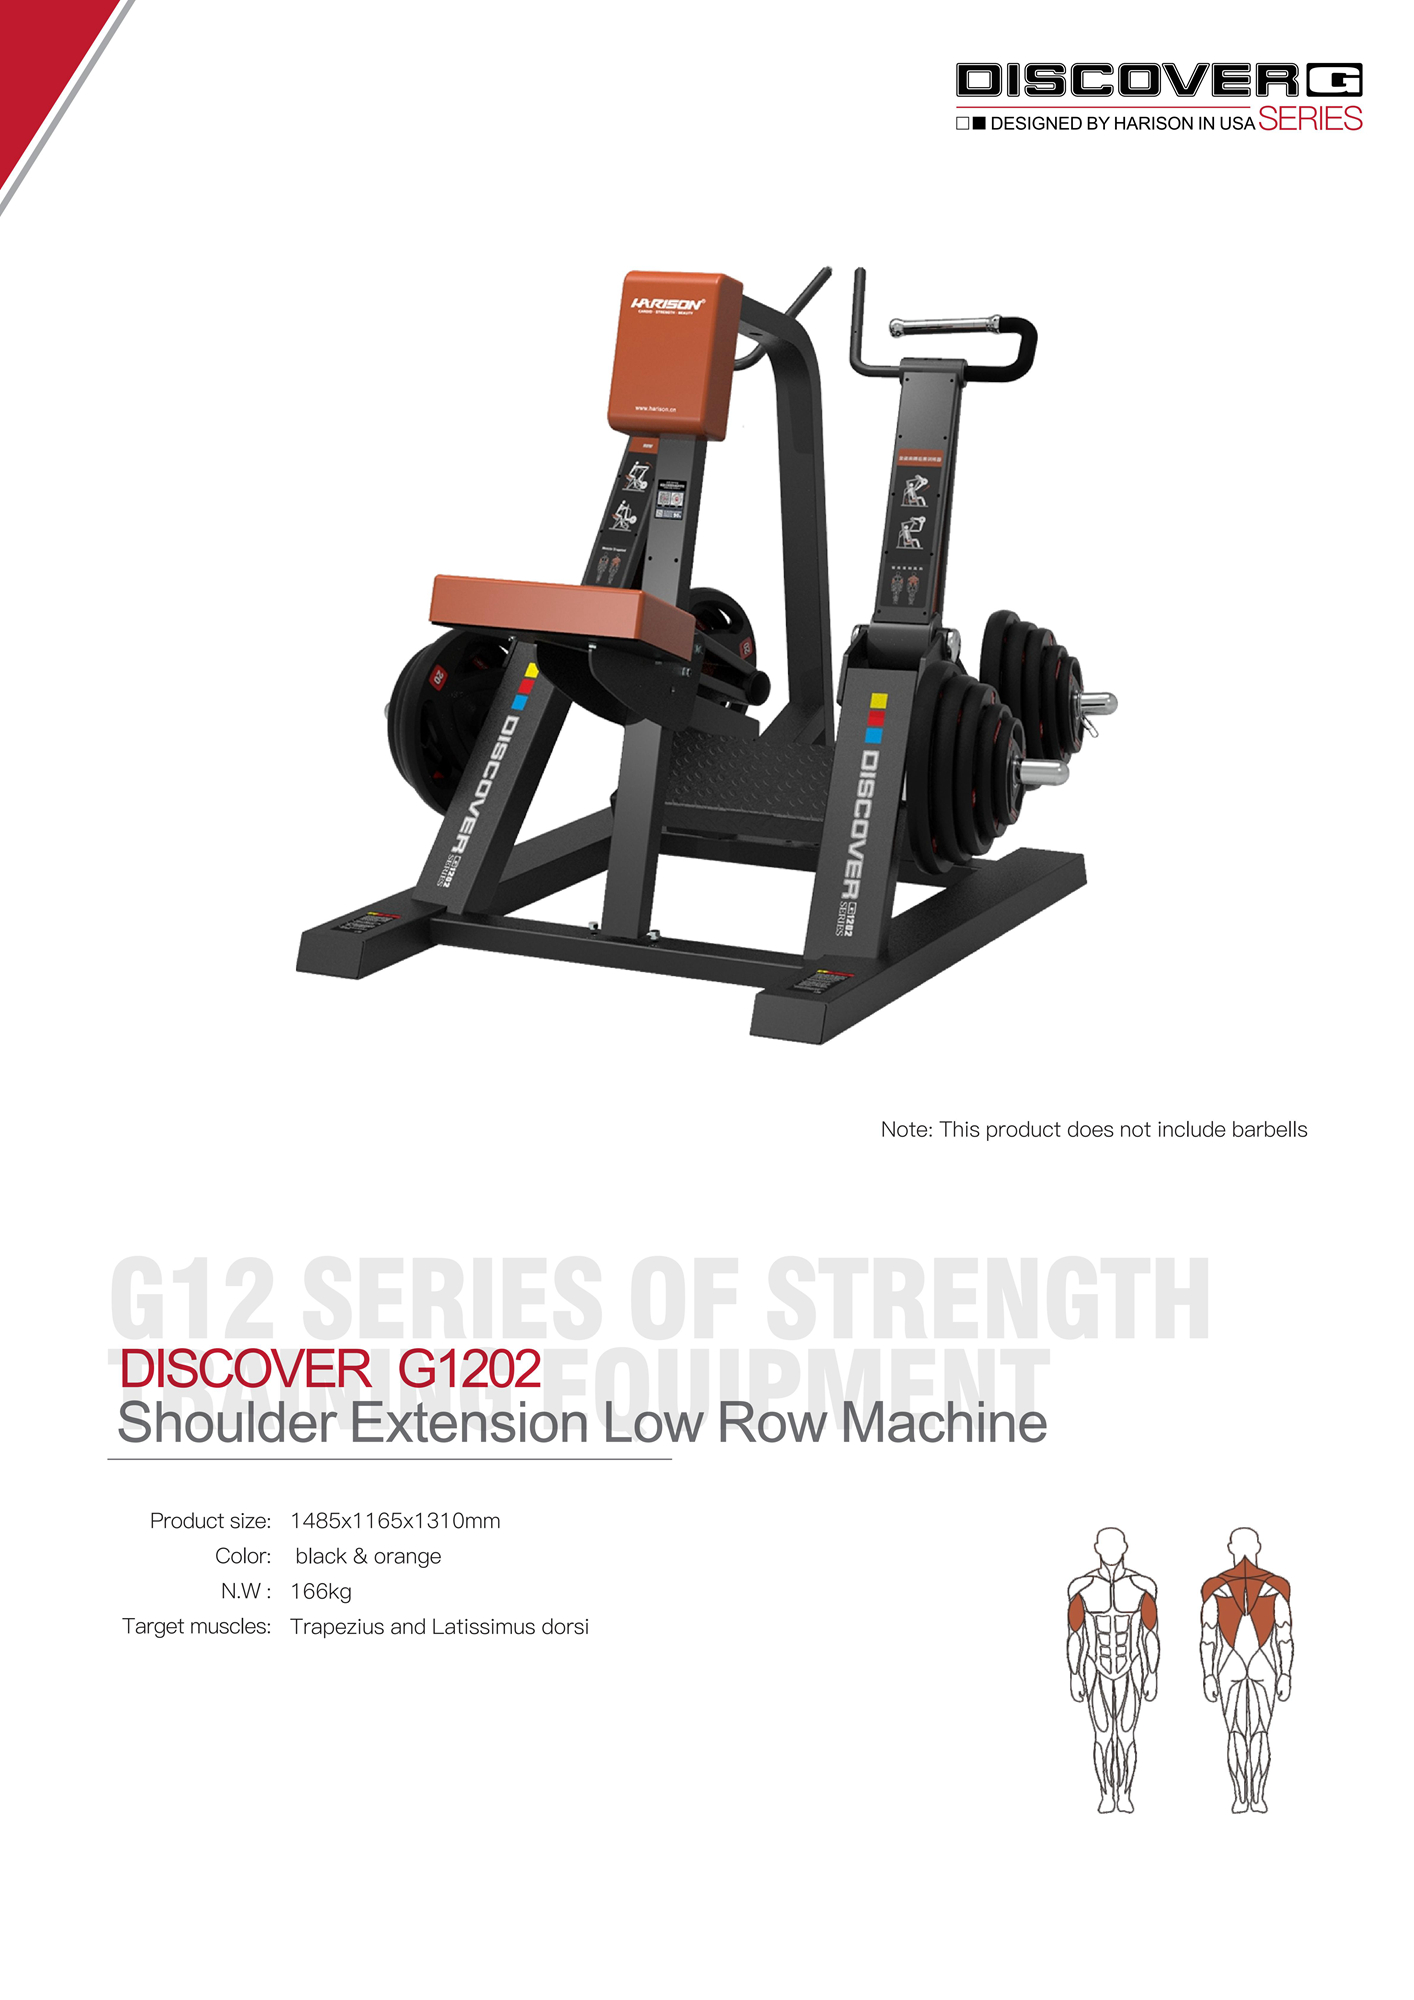 DISCOVER G1202 Shoulder Extension Low Row Machine